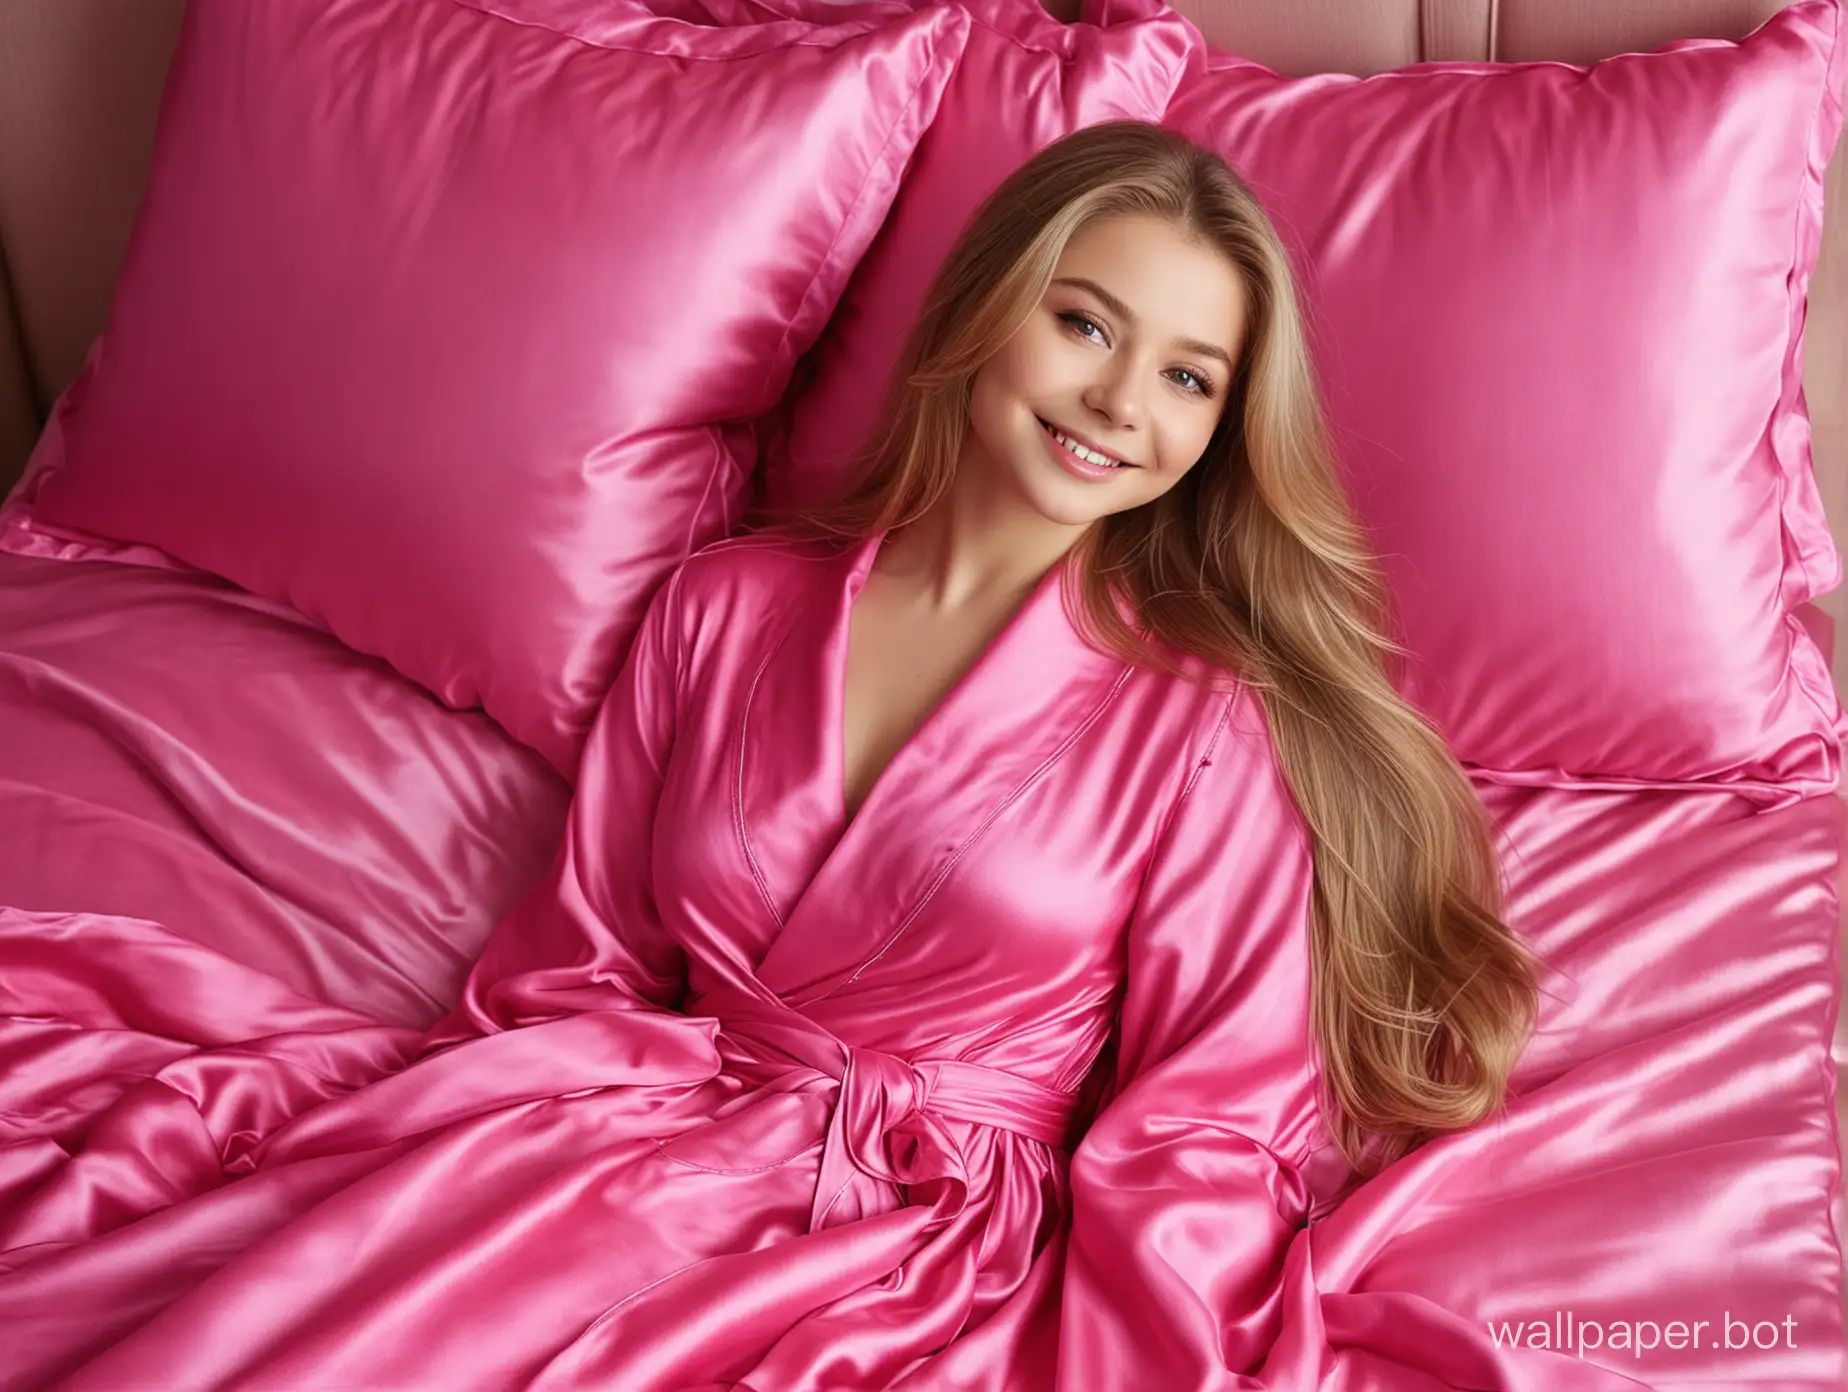 Sweet Yulia Lipnitskaya smiles with long straight silky hair in long Beautiful, gentle, Luxurious glamour natural hot pink fuchsia mulberry silk robe relaxing in royal, pink fuchsia silk bed on silk background